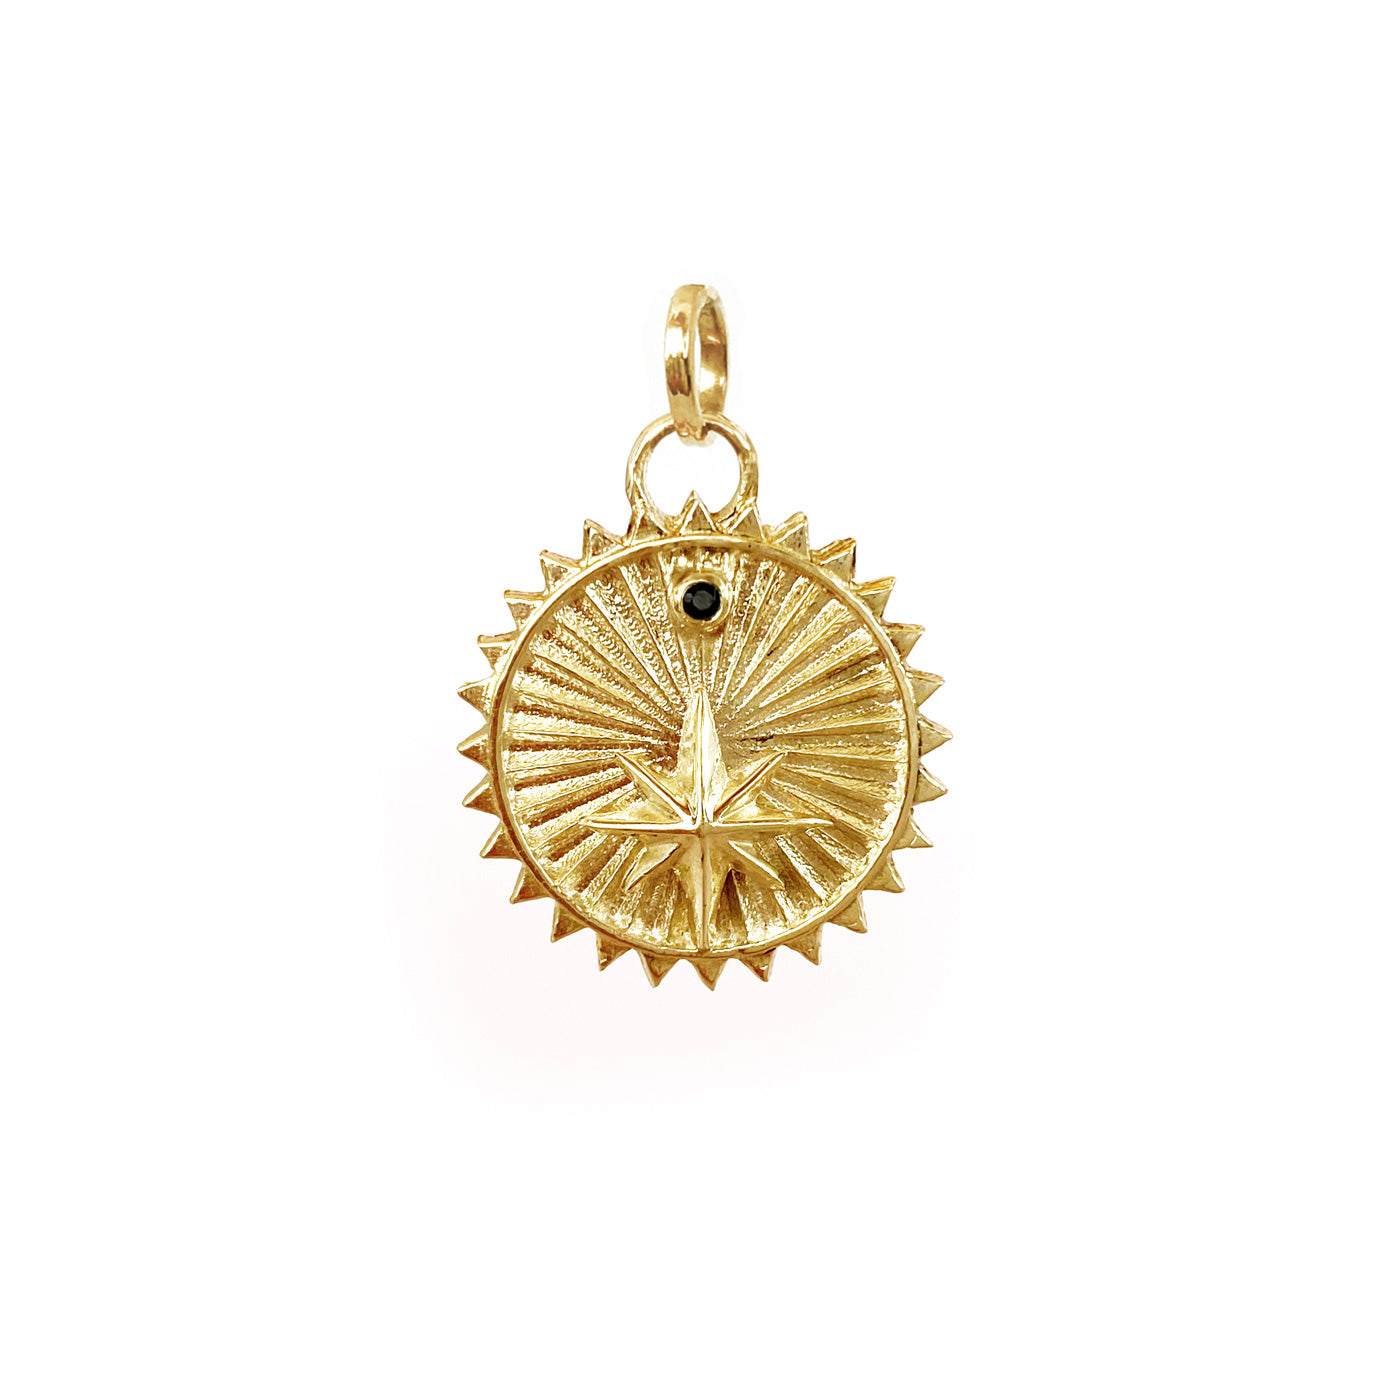 gold medallion charm with star mystical jewelry colombian jewelry designers ana buendia